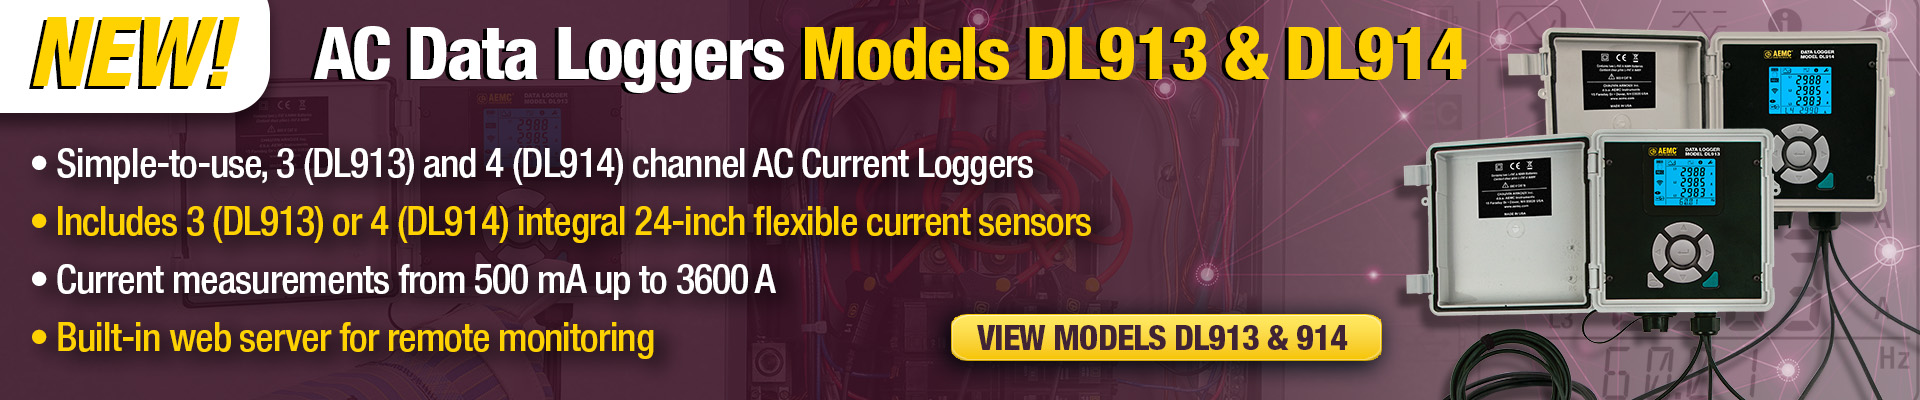 Introducing the NEW AC Current Loggers Models DL913  and DL914.